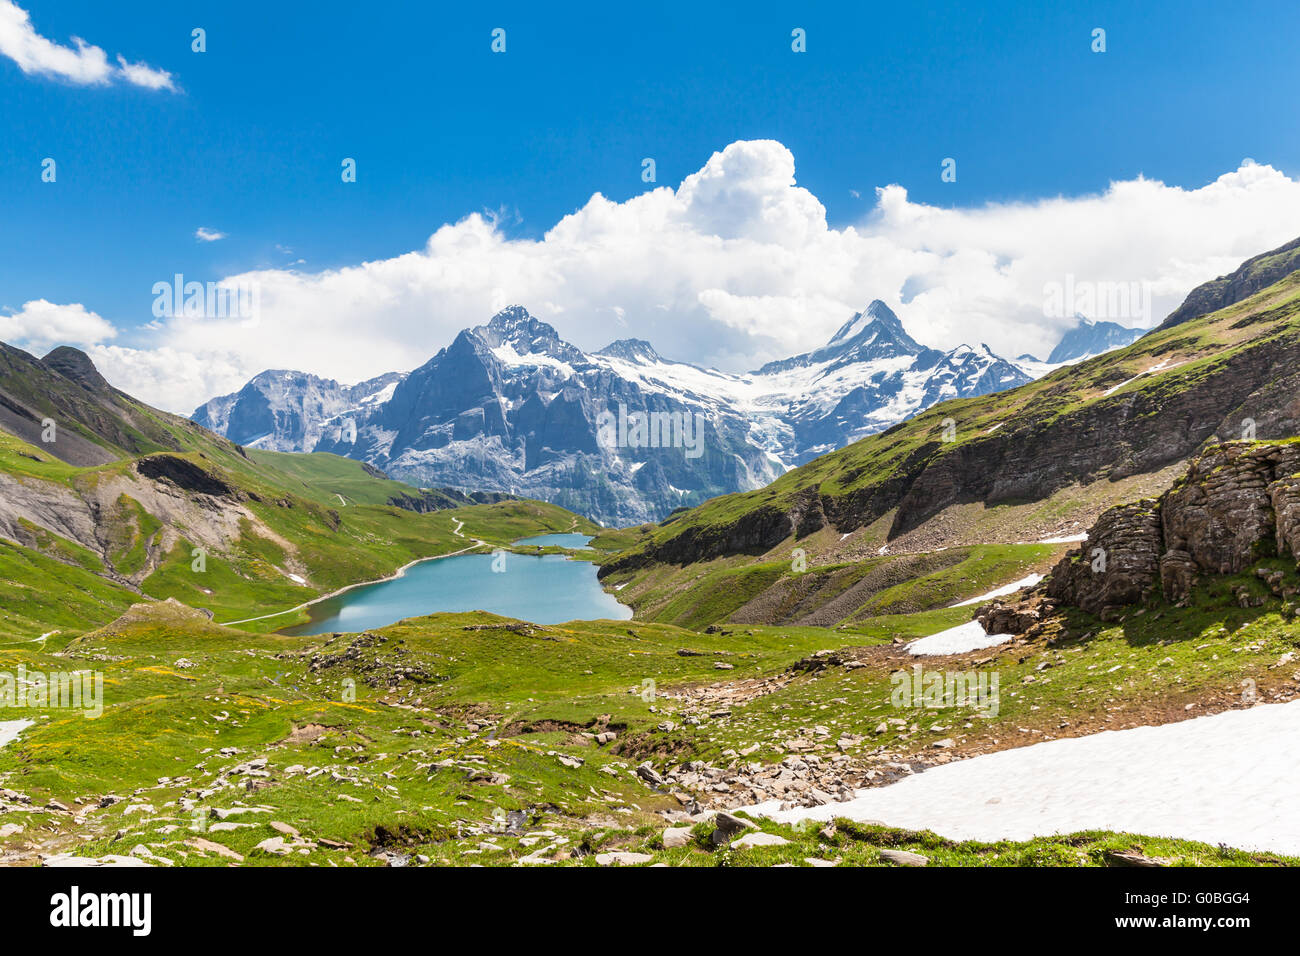 View of the Bachalpsee (lake) and Schreckhorn, Grindelwald, Switzerland Stock Photo